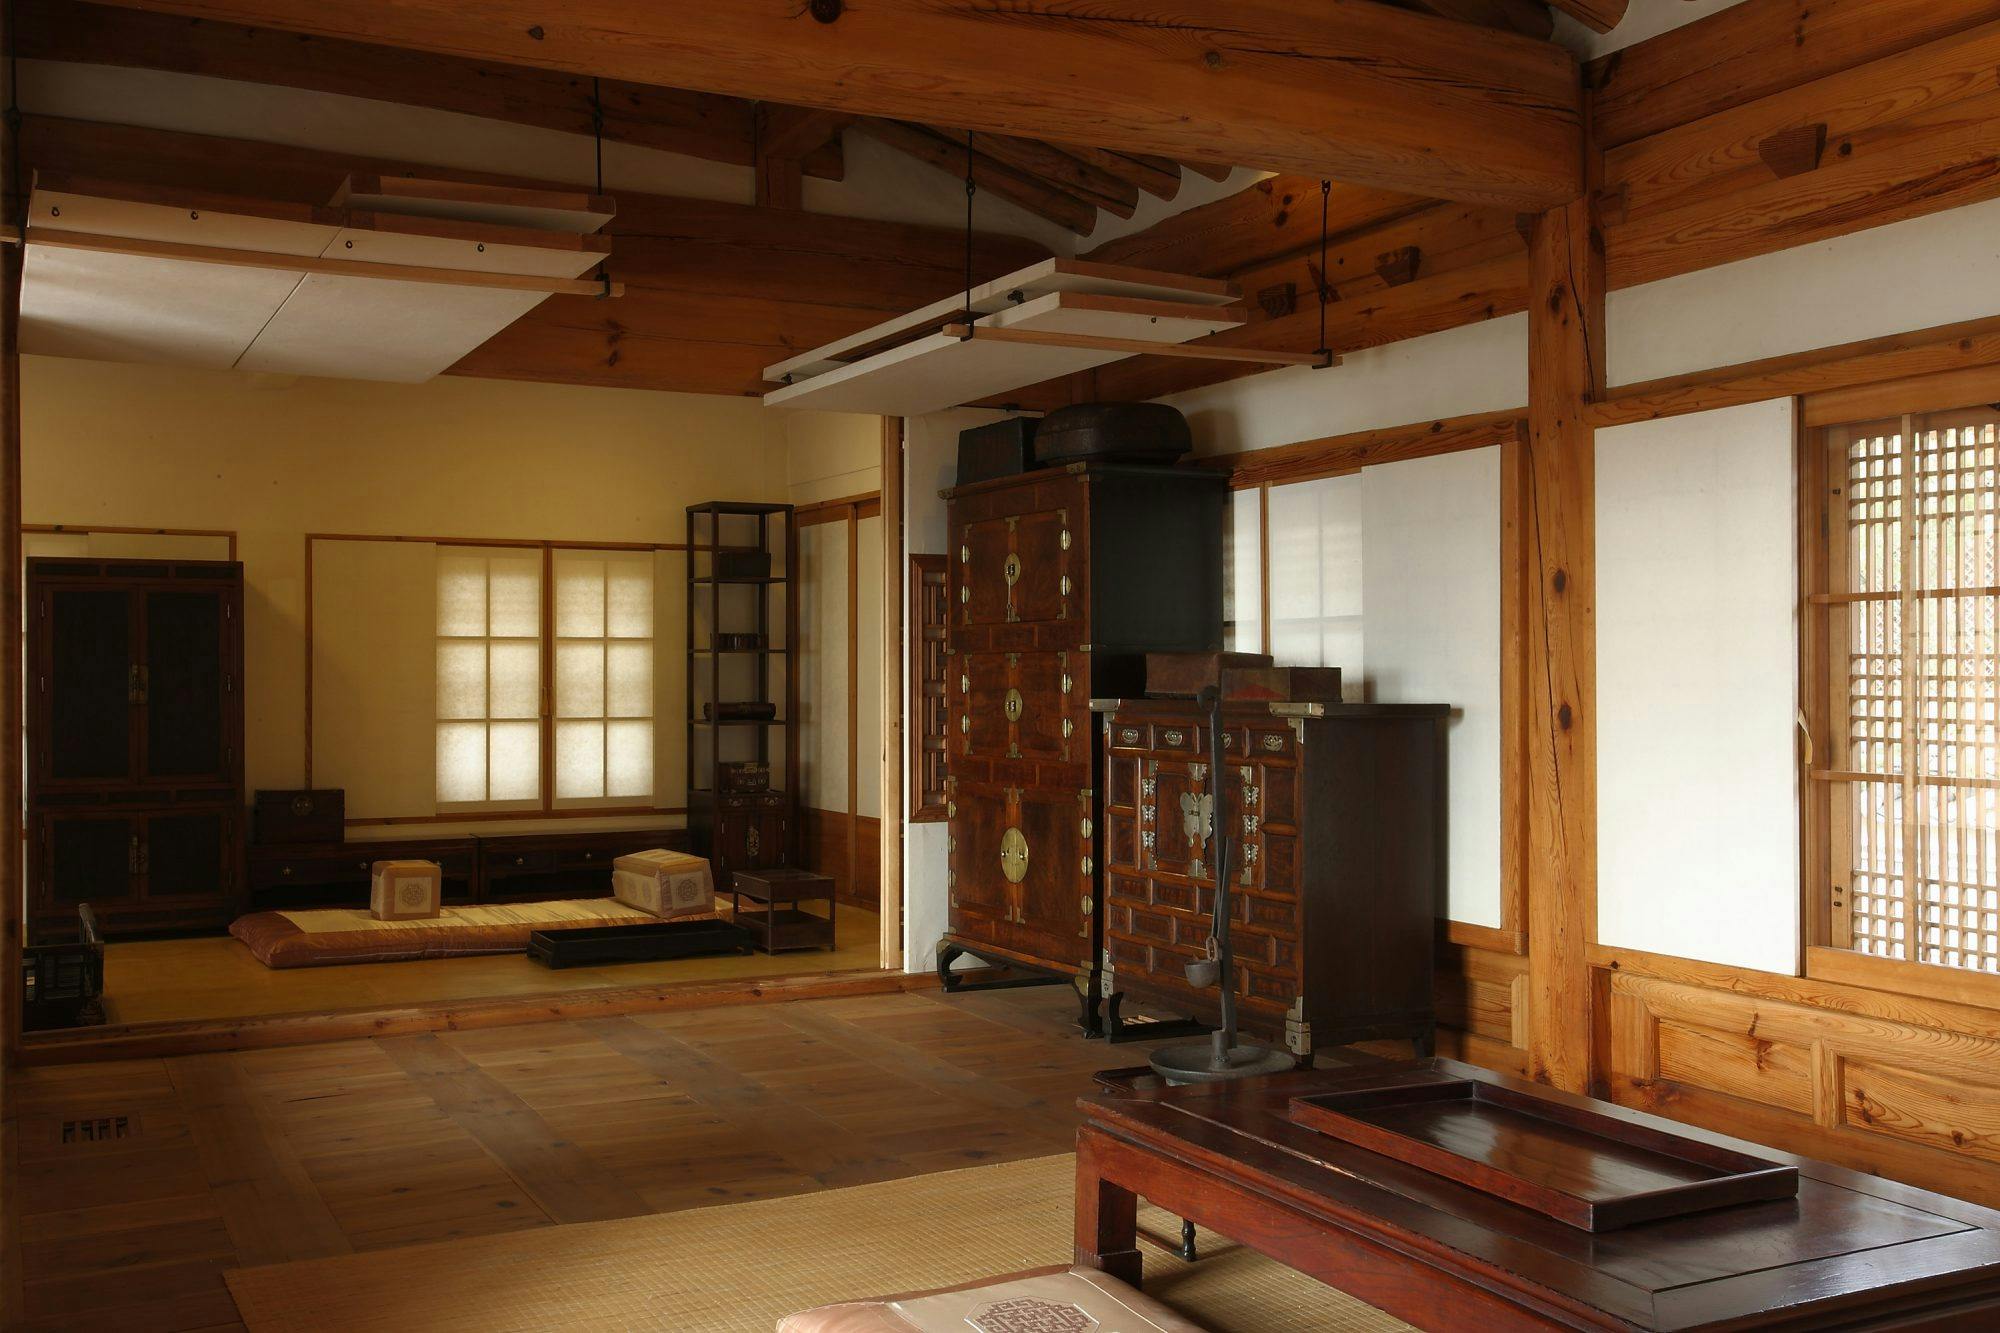 One of the room vignettes in the Korean Museum of Furniture | Photo coutesy of Kinfolk